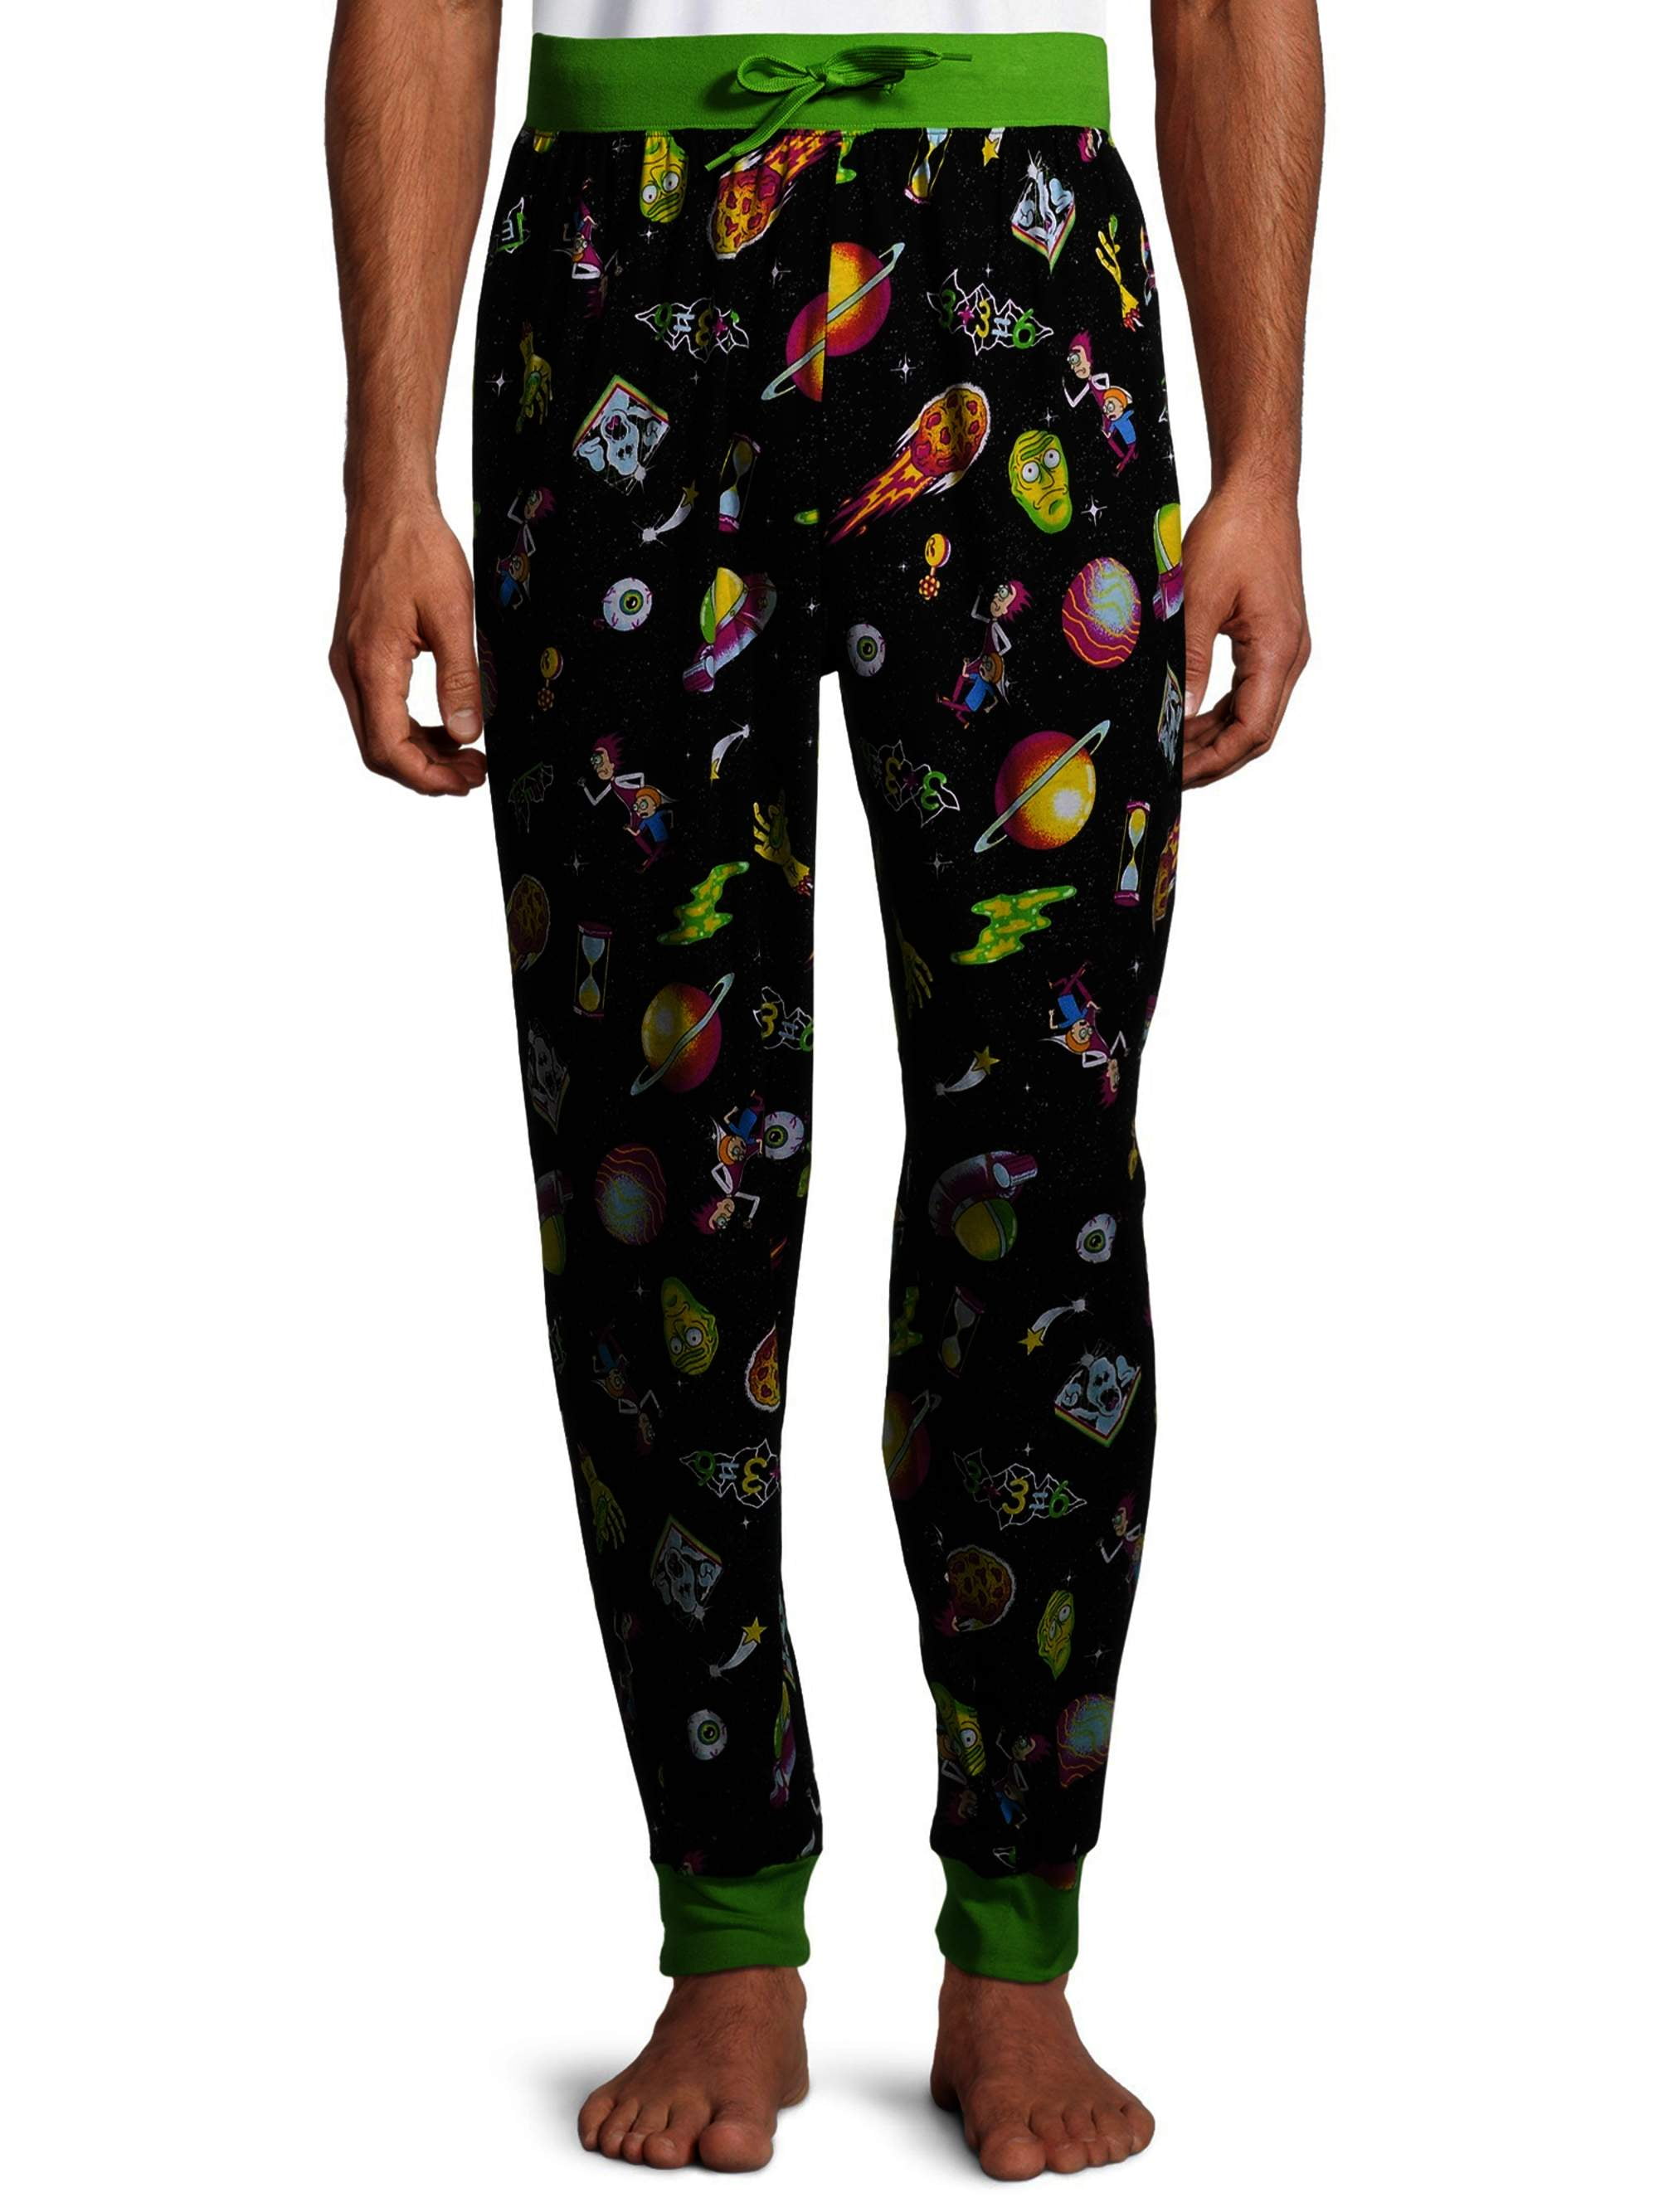 RICK AND MORTY Sweatpants for Men Joggers for Men 